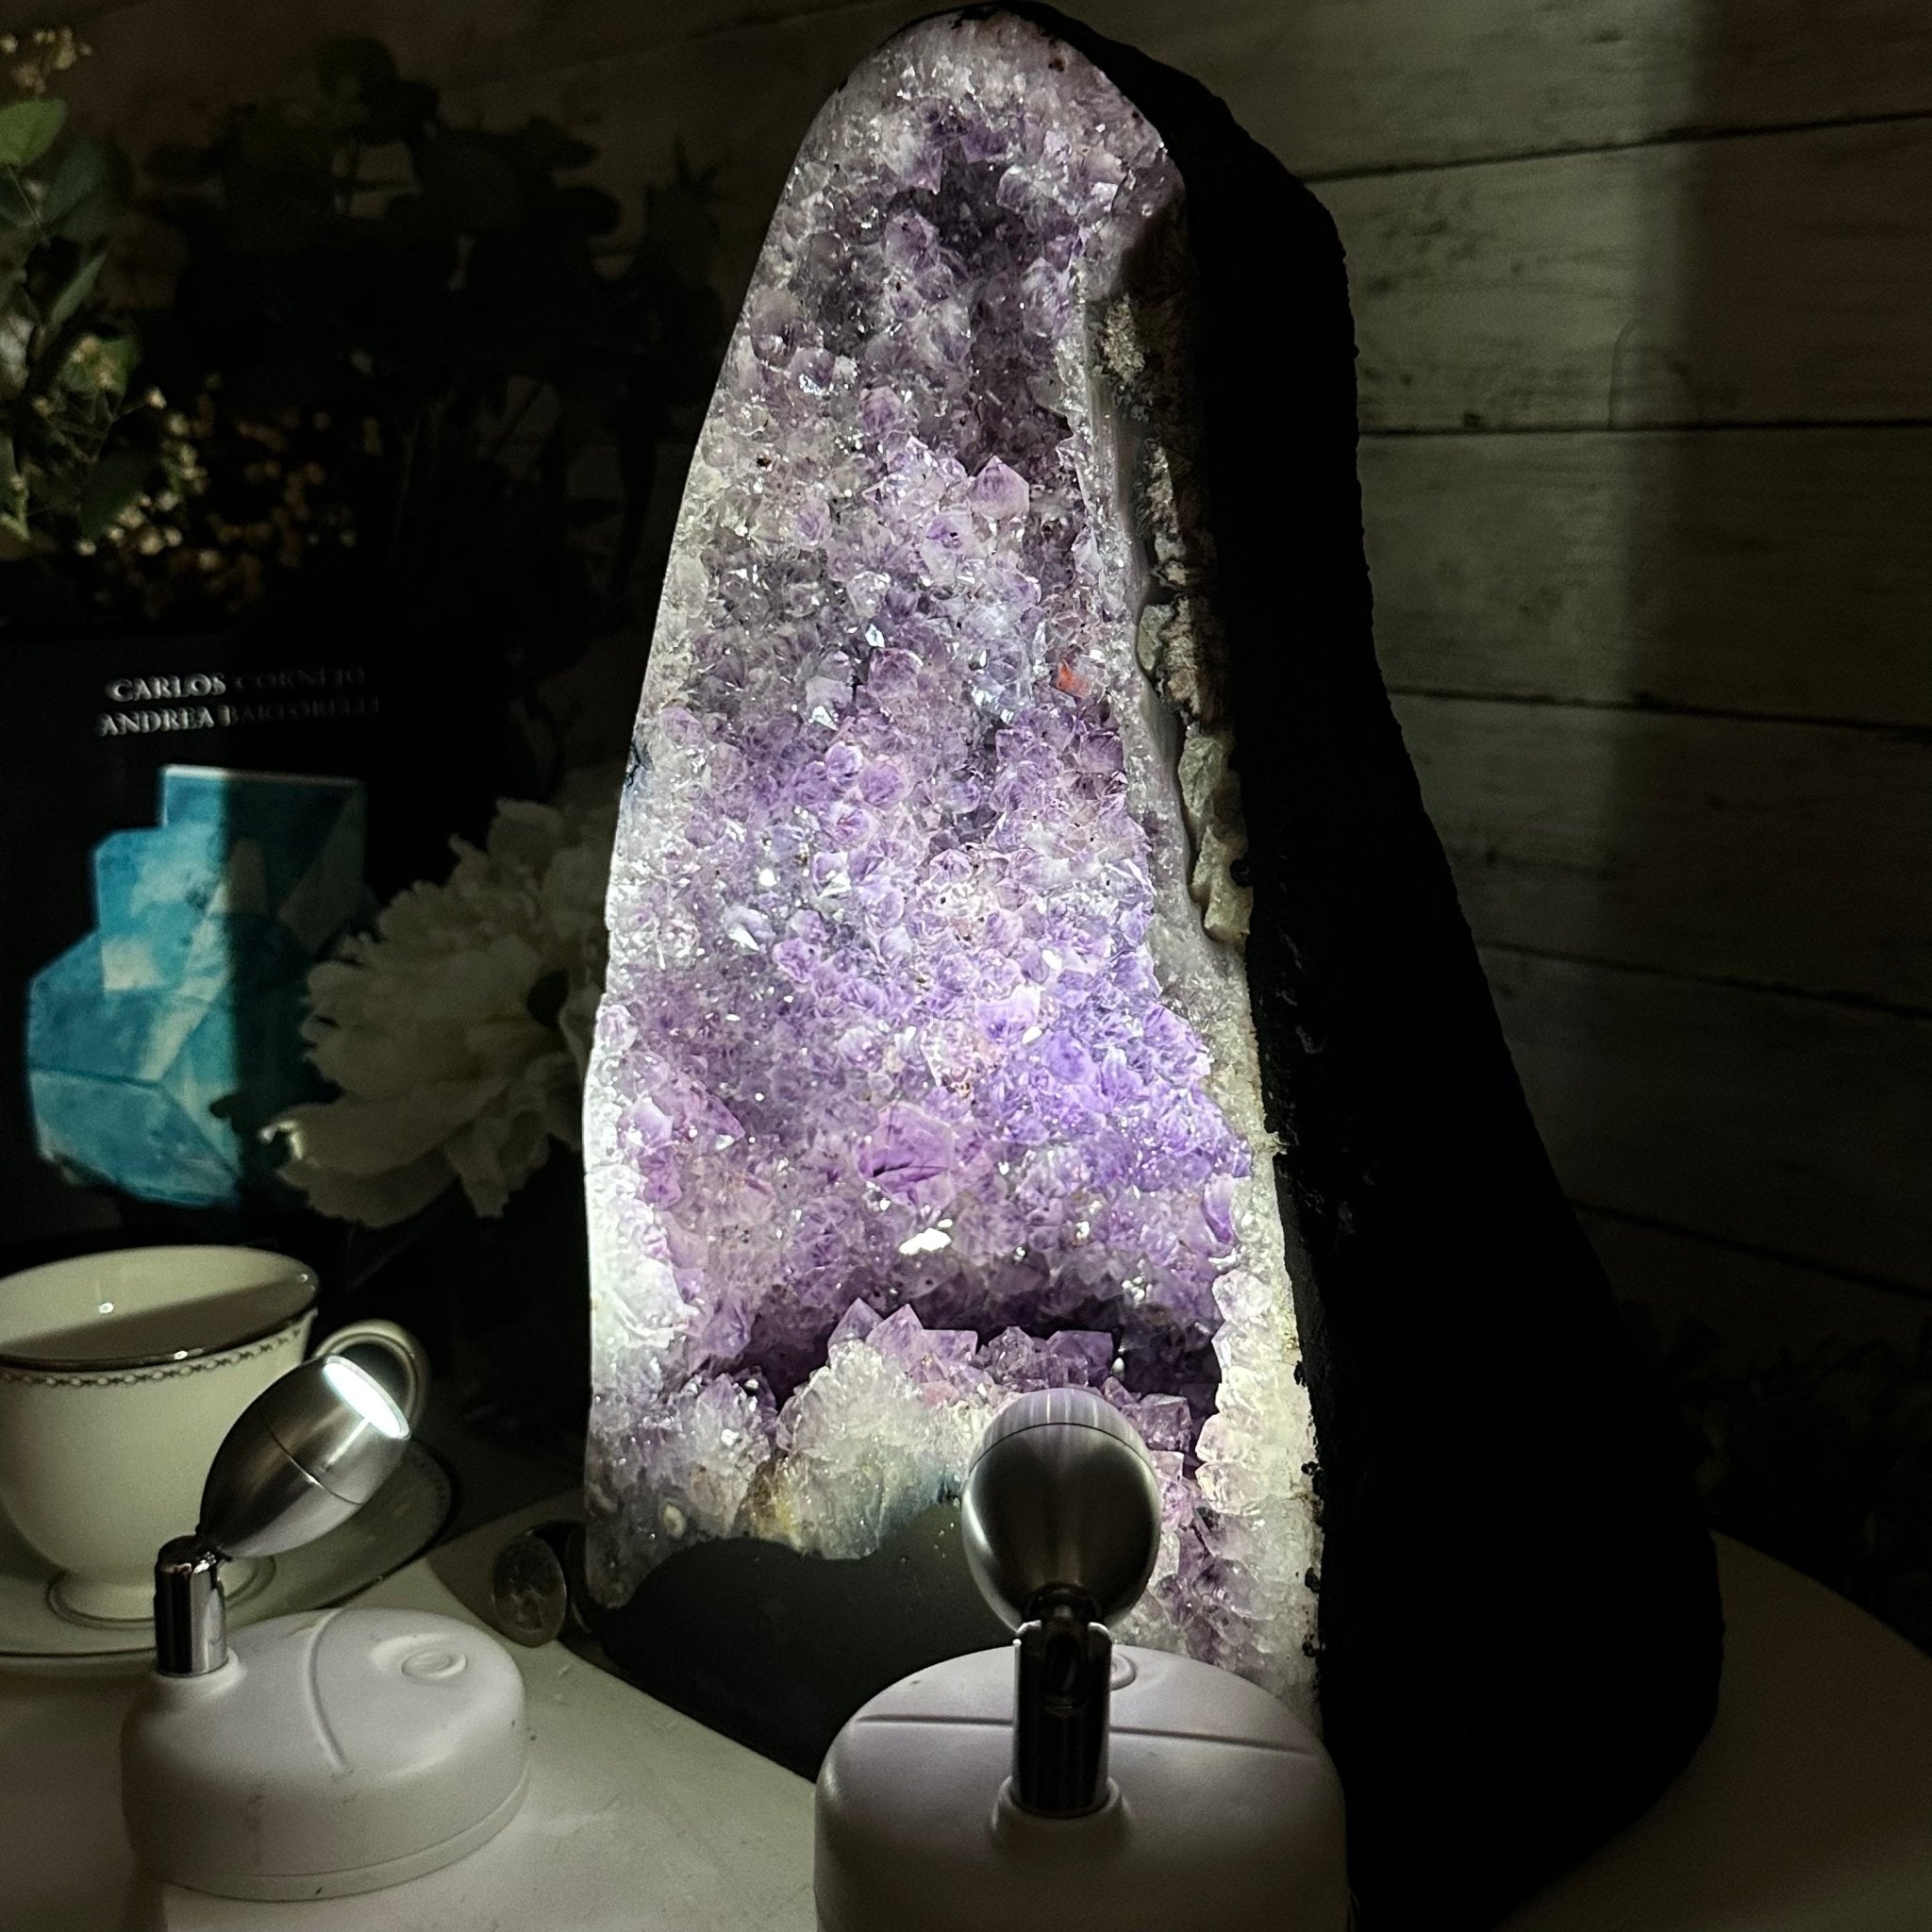 Extra Plus Quality Brazilian Amethyst Cathedral, 21.7 lbs & 13" Tall, Model #5601-0977 by Brazil Gems - Brazil GemsBrazil GemsExtra Plus Quality Brazilian Amethyst Cathedral, 21.7 lbs & 13" Tall, Model #5601-0977 by Brazil GemsCathedrals5601-0977